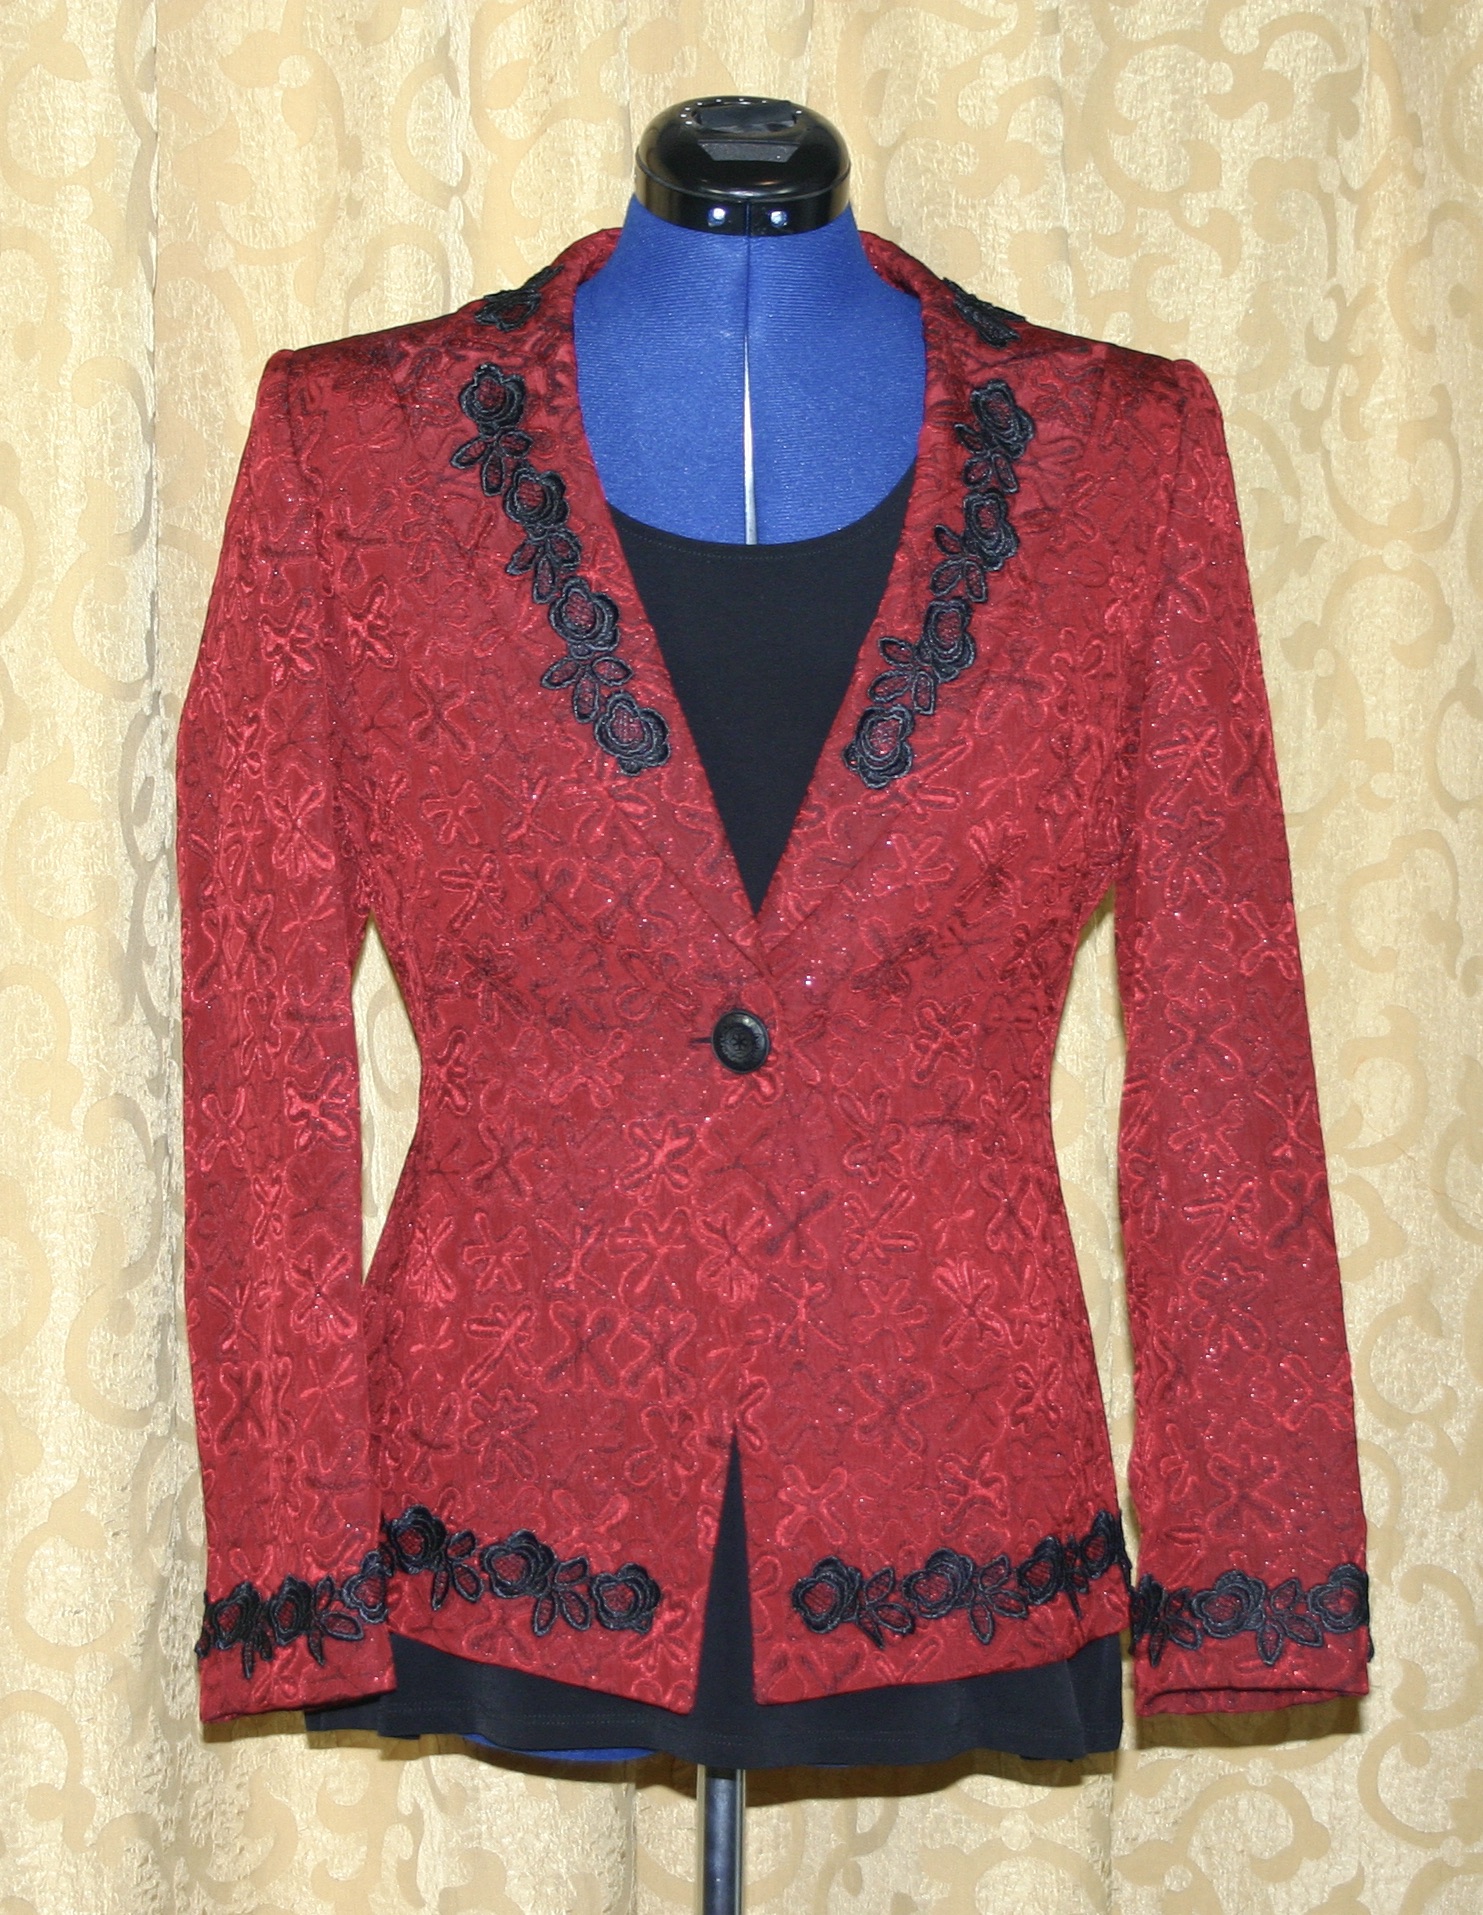 A red and black blazer on a mannequin.